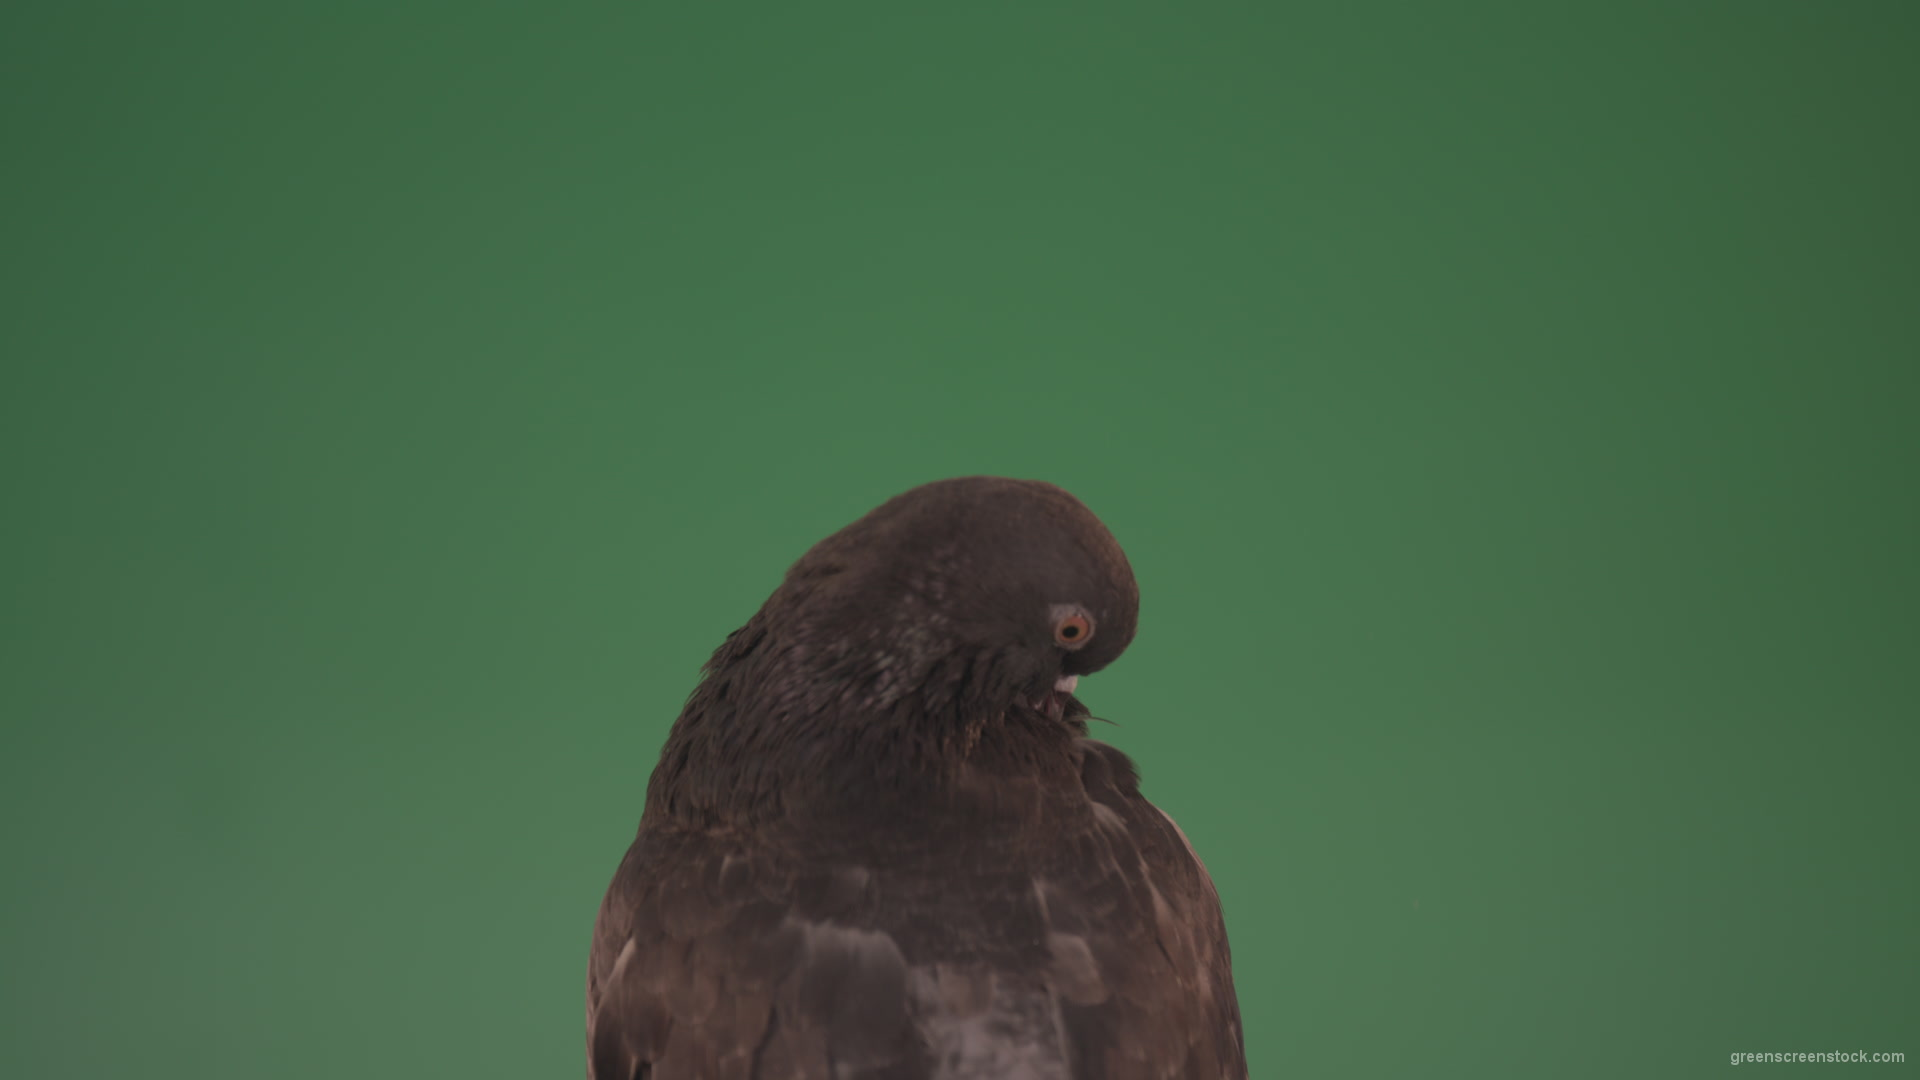 Sitting-wings-to-the-chicken-bird-home-pigeon-isolated-on-chromakey-background_005 Green Screen Stock